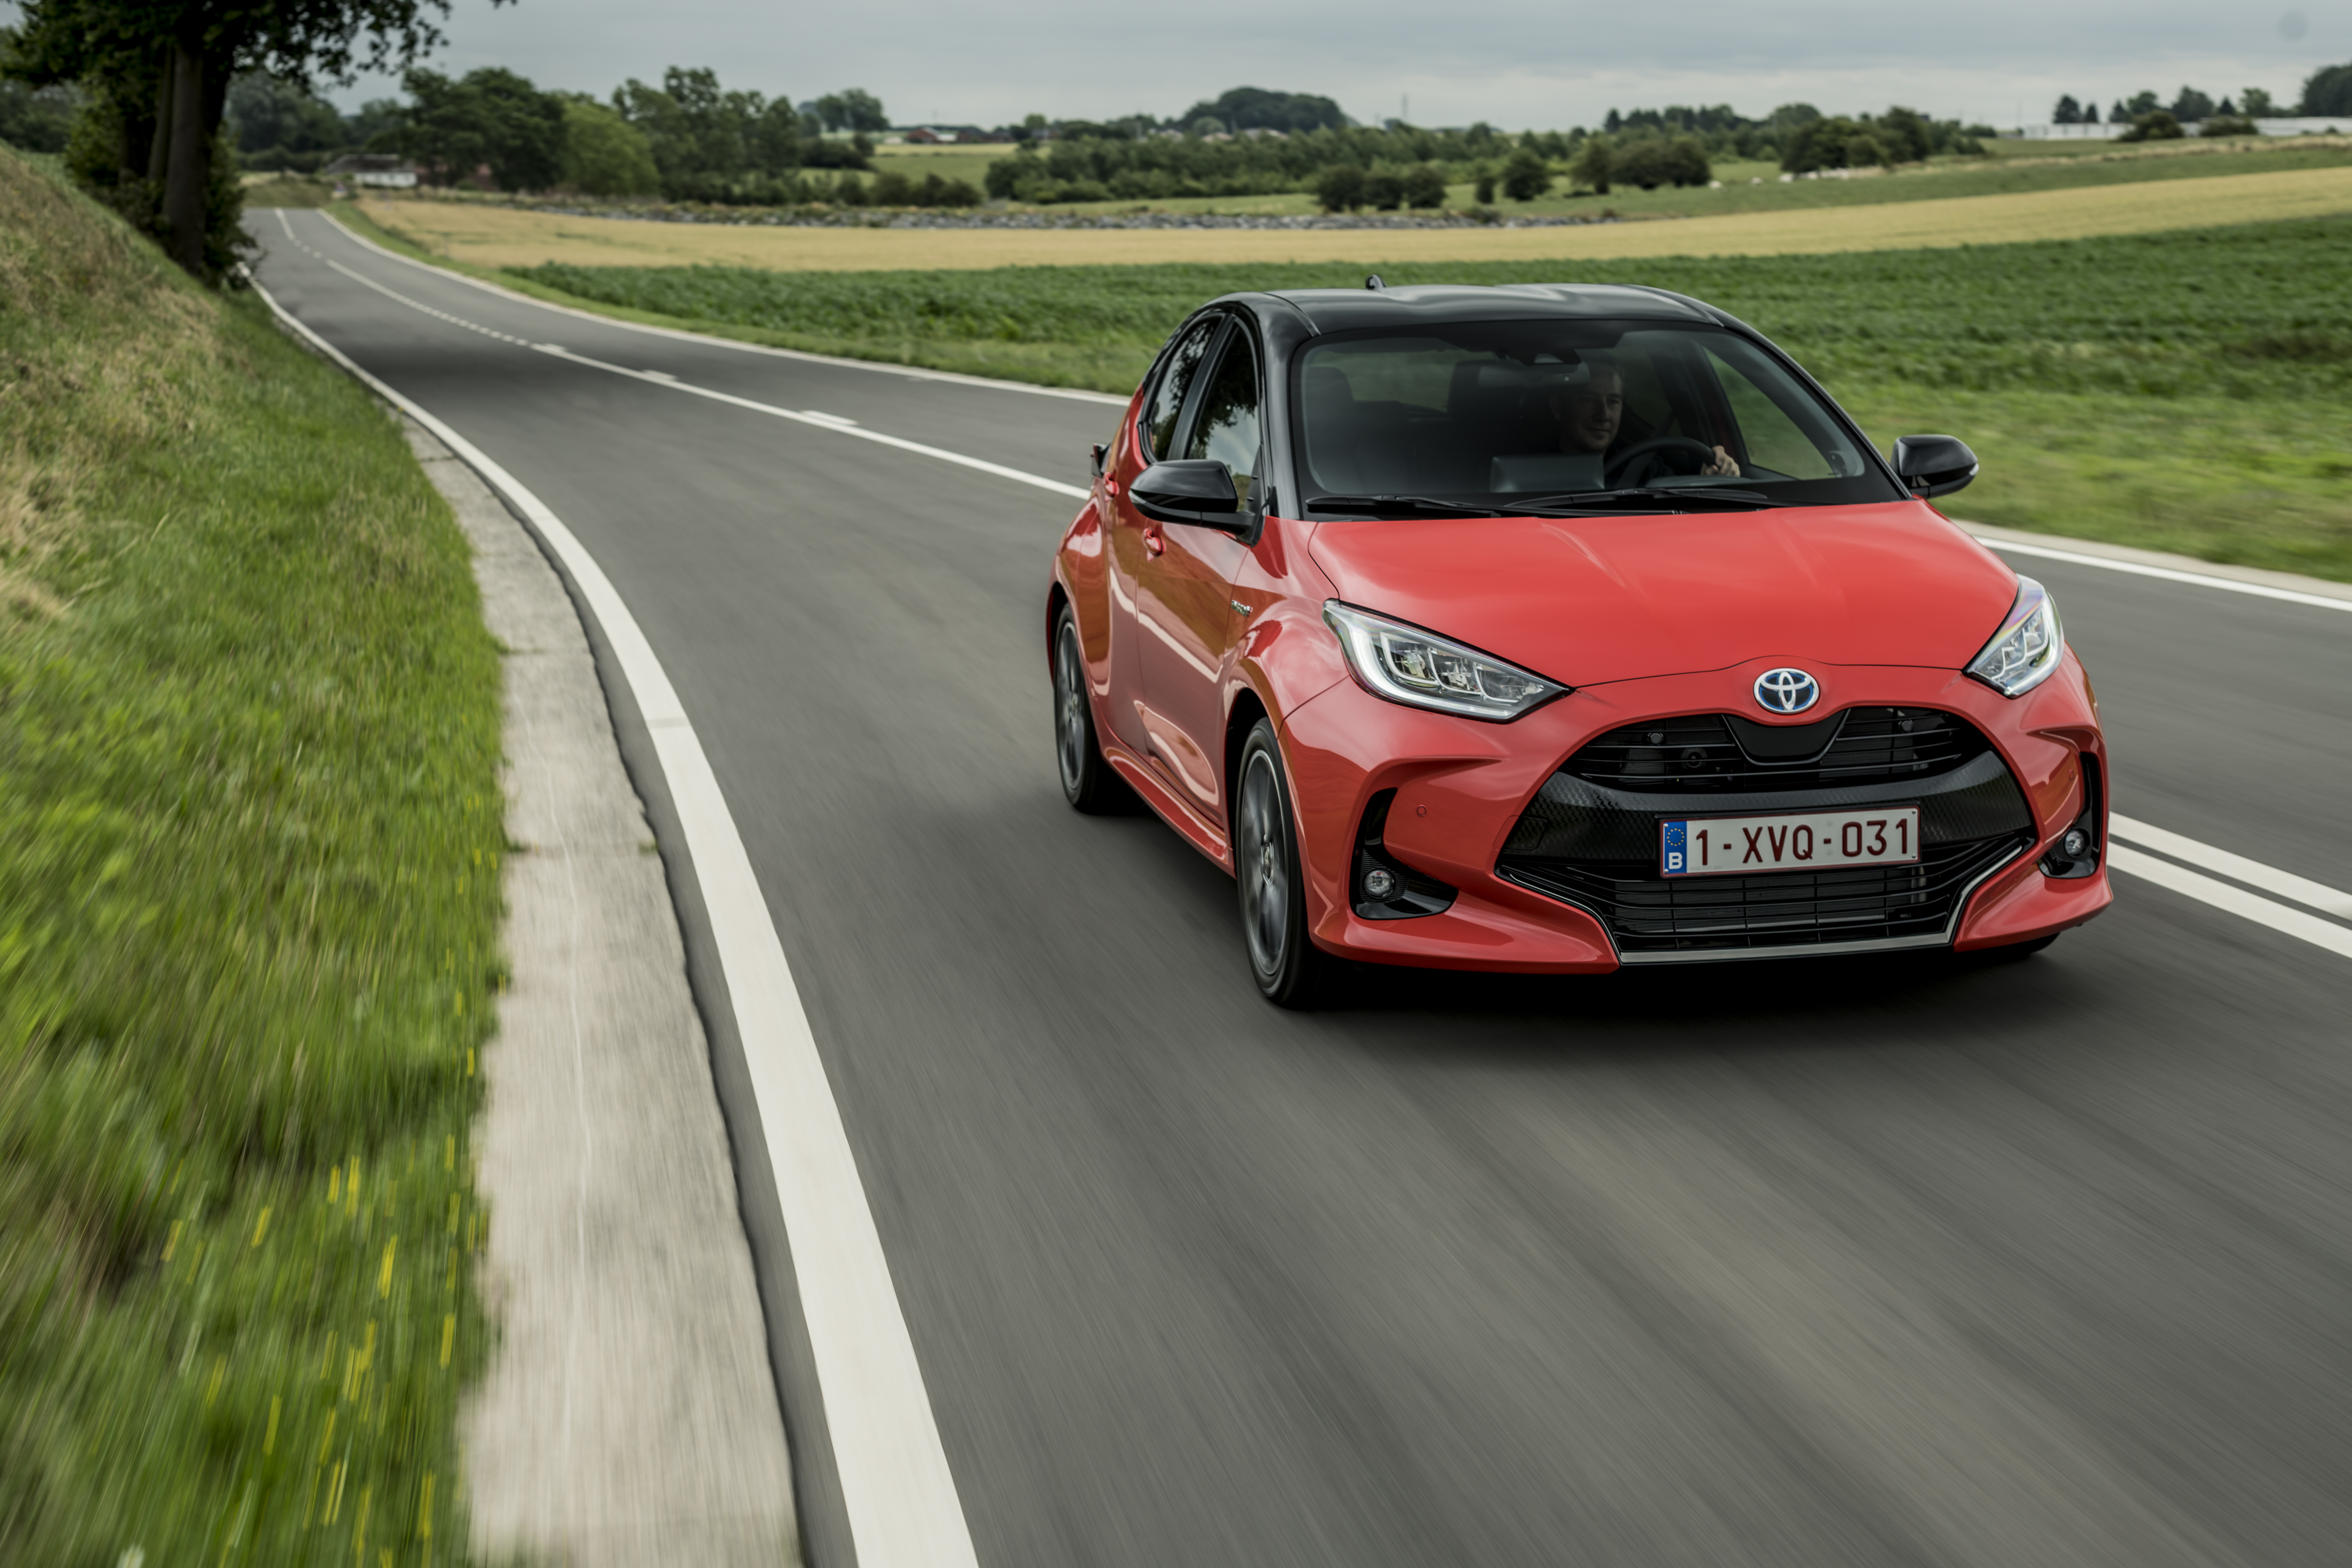 2020 Toyota Yaris detailed for Europe 125 PS petrol and